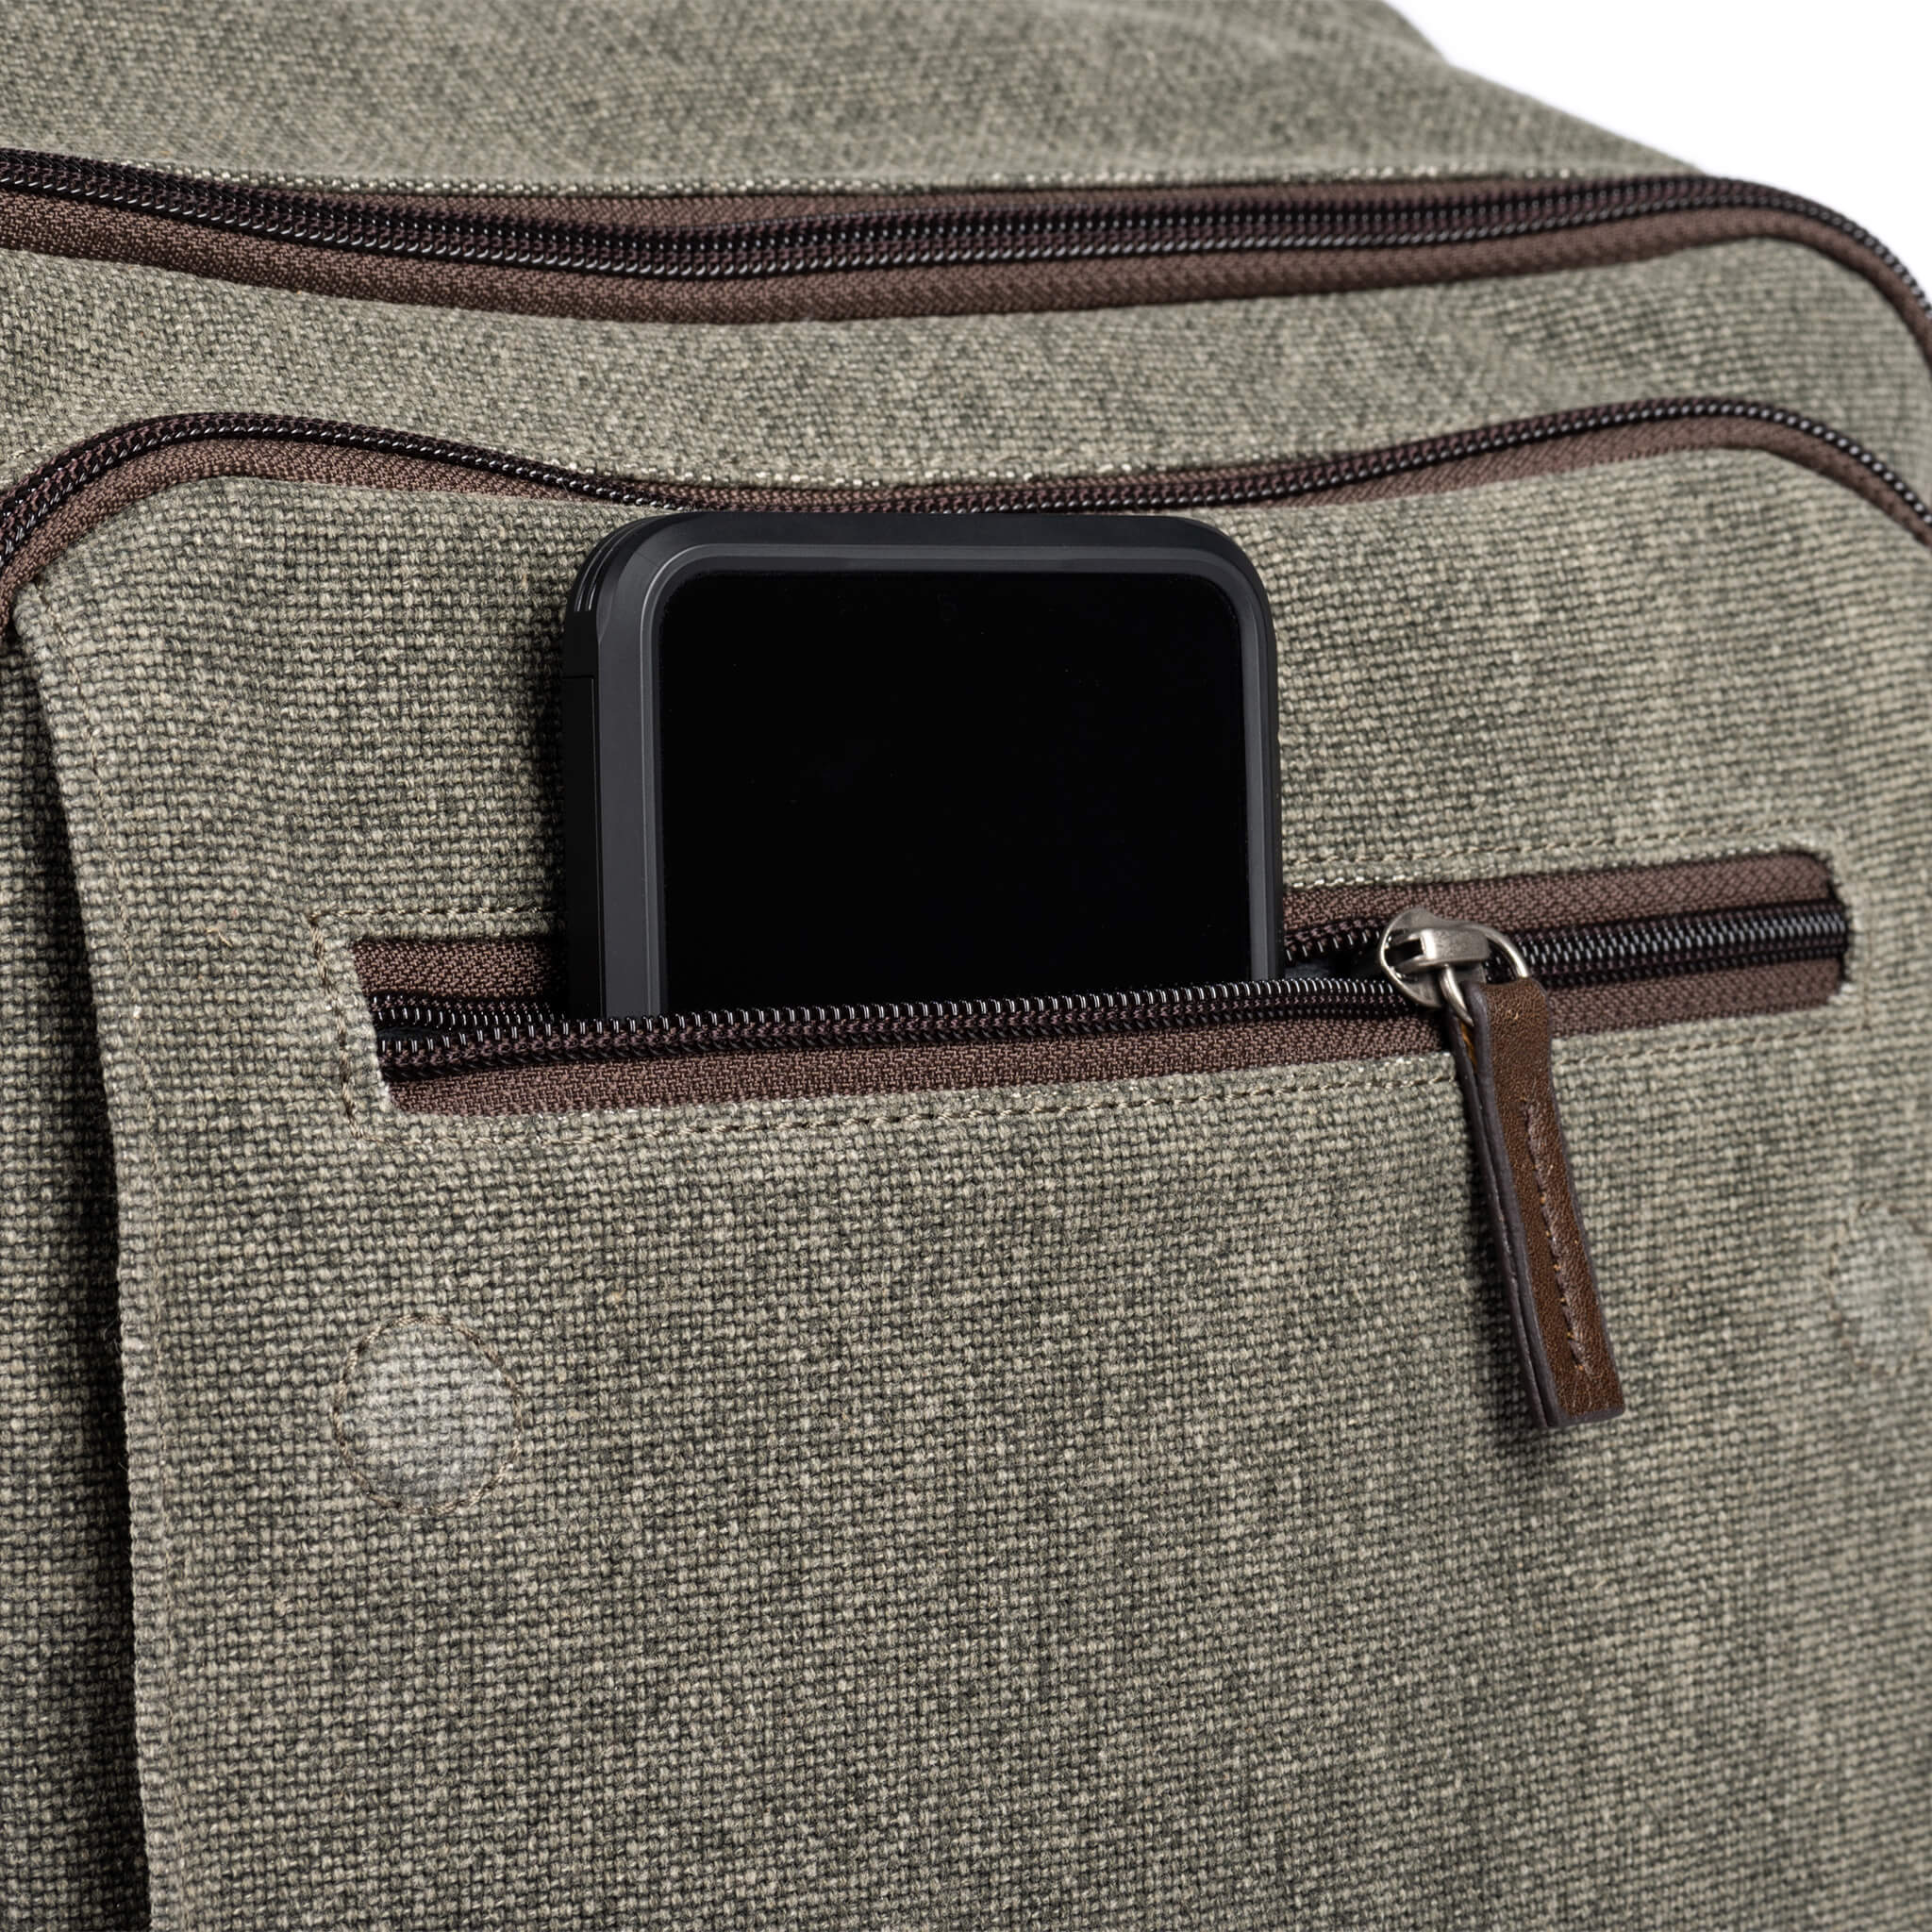 Zippered phone pocket lined with mirofiber fits plus-sized phones with cases